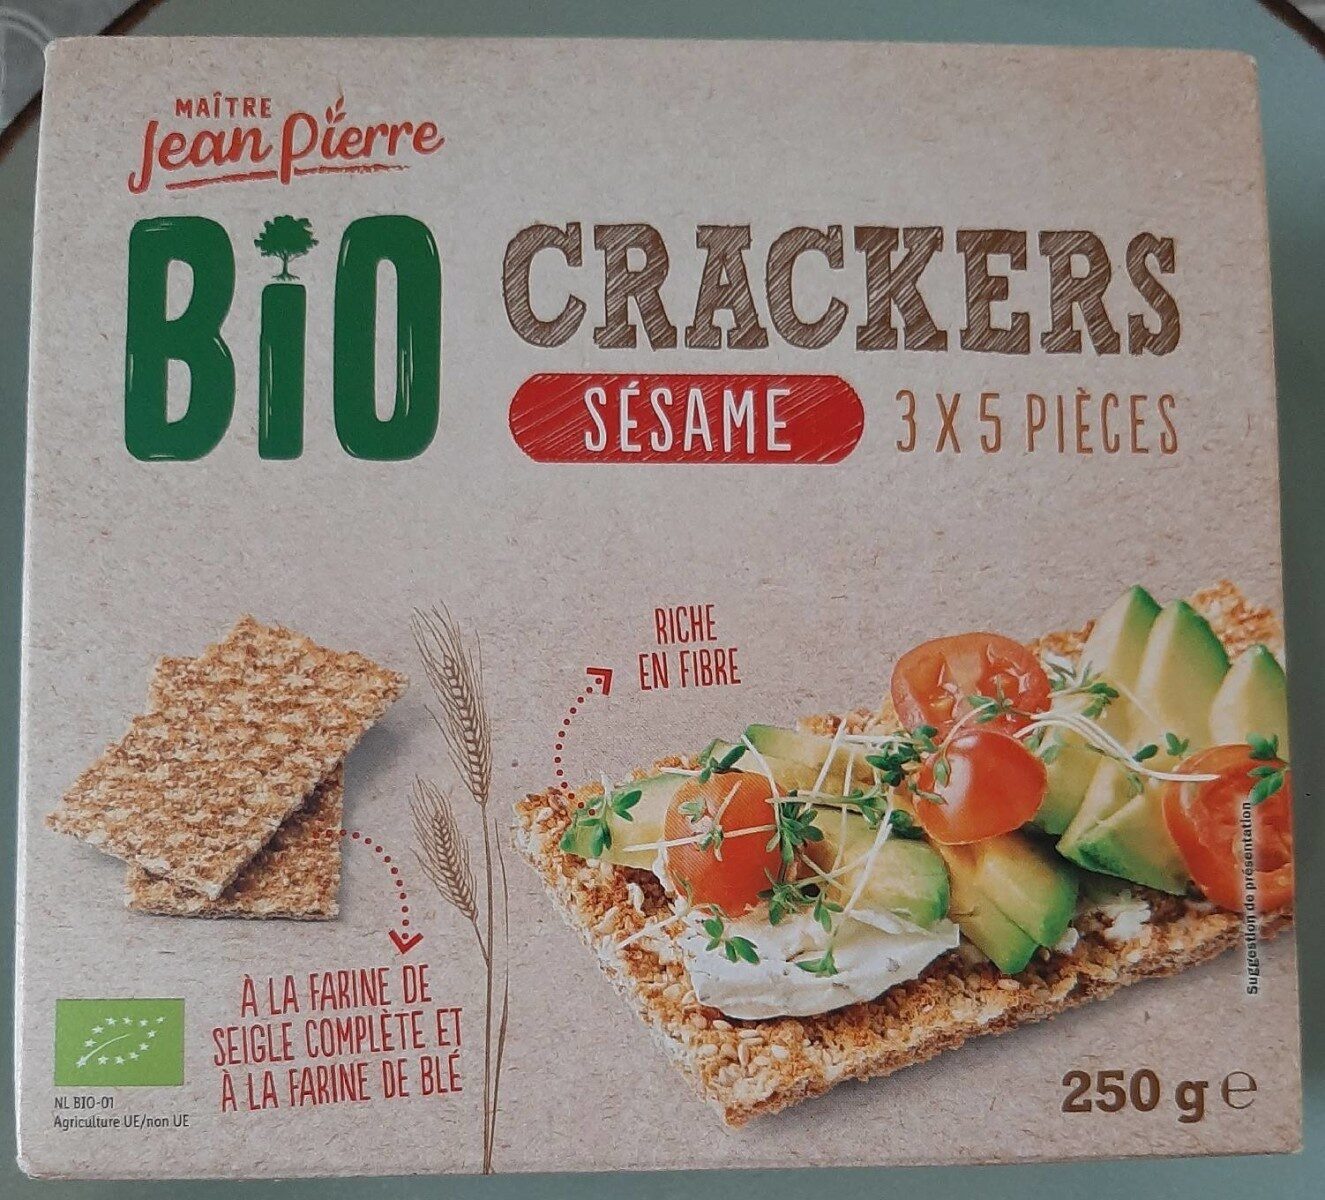 Crackers sesame - Producto - fr